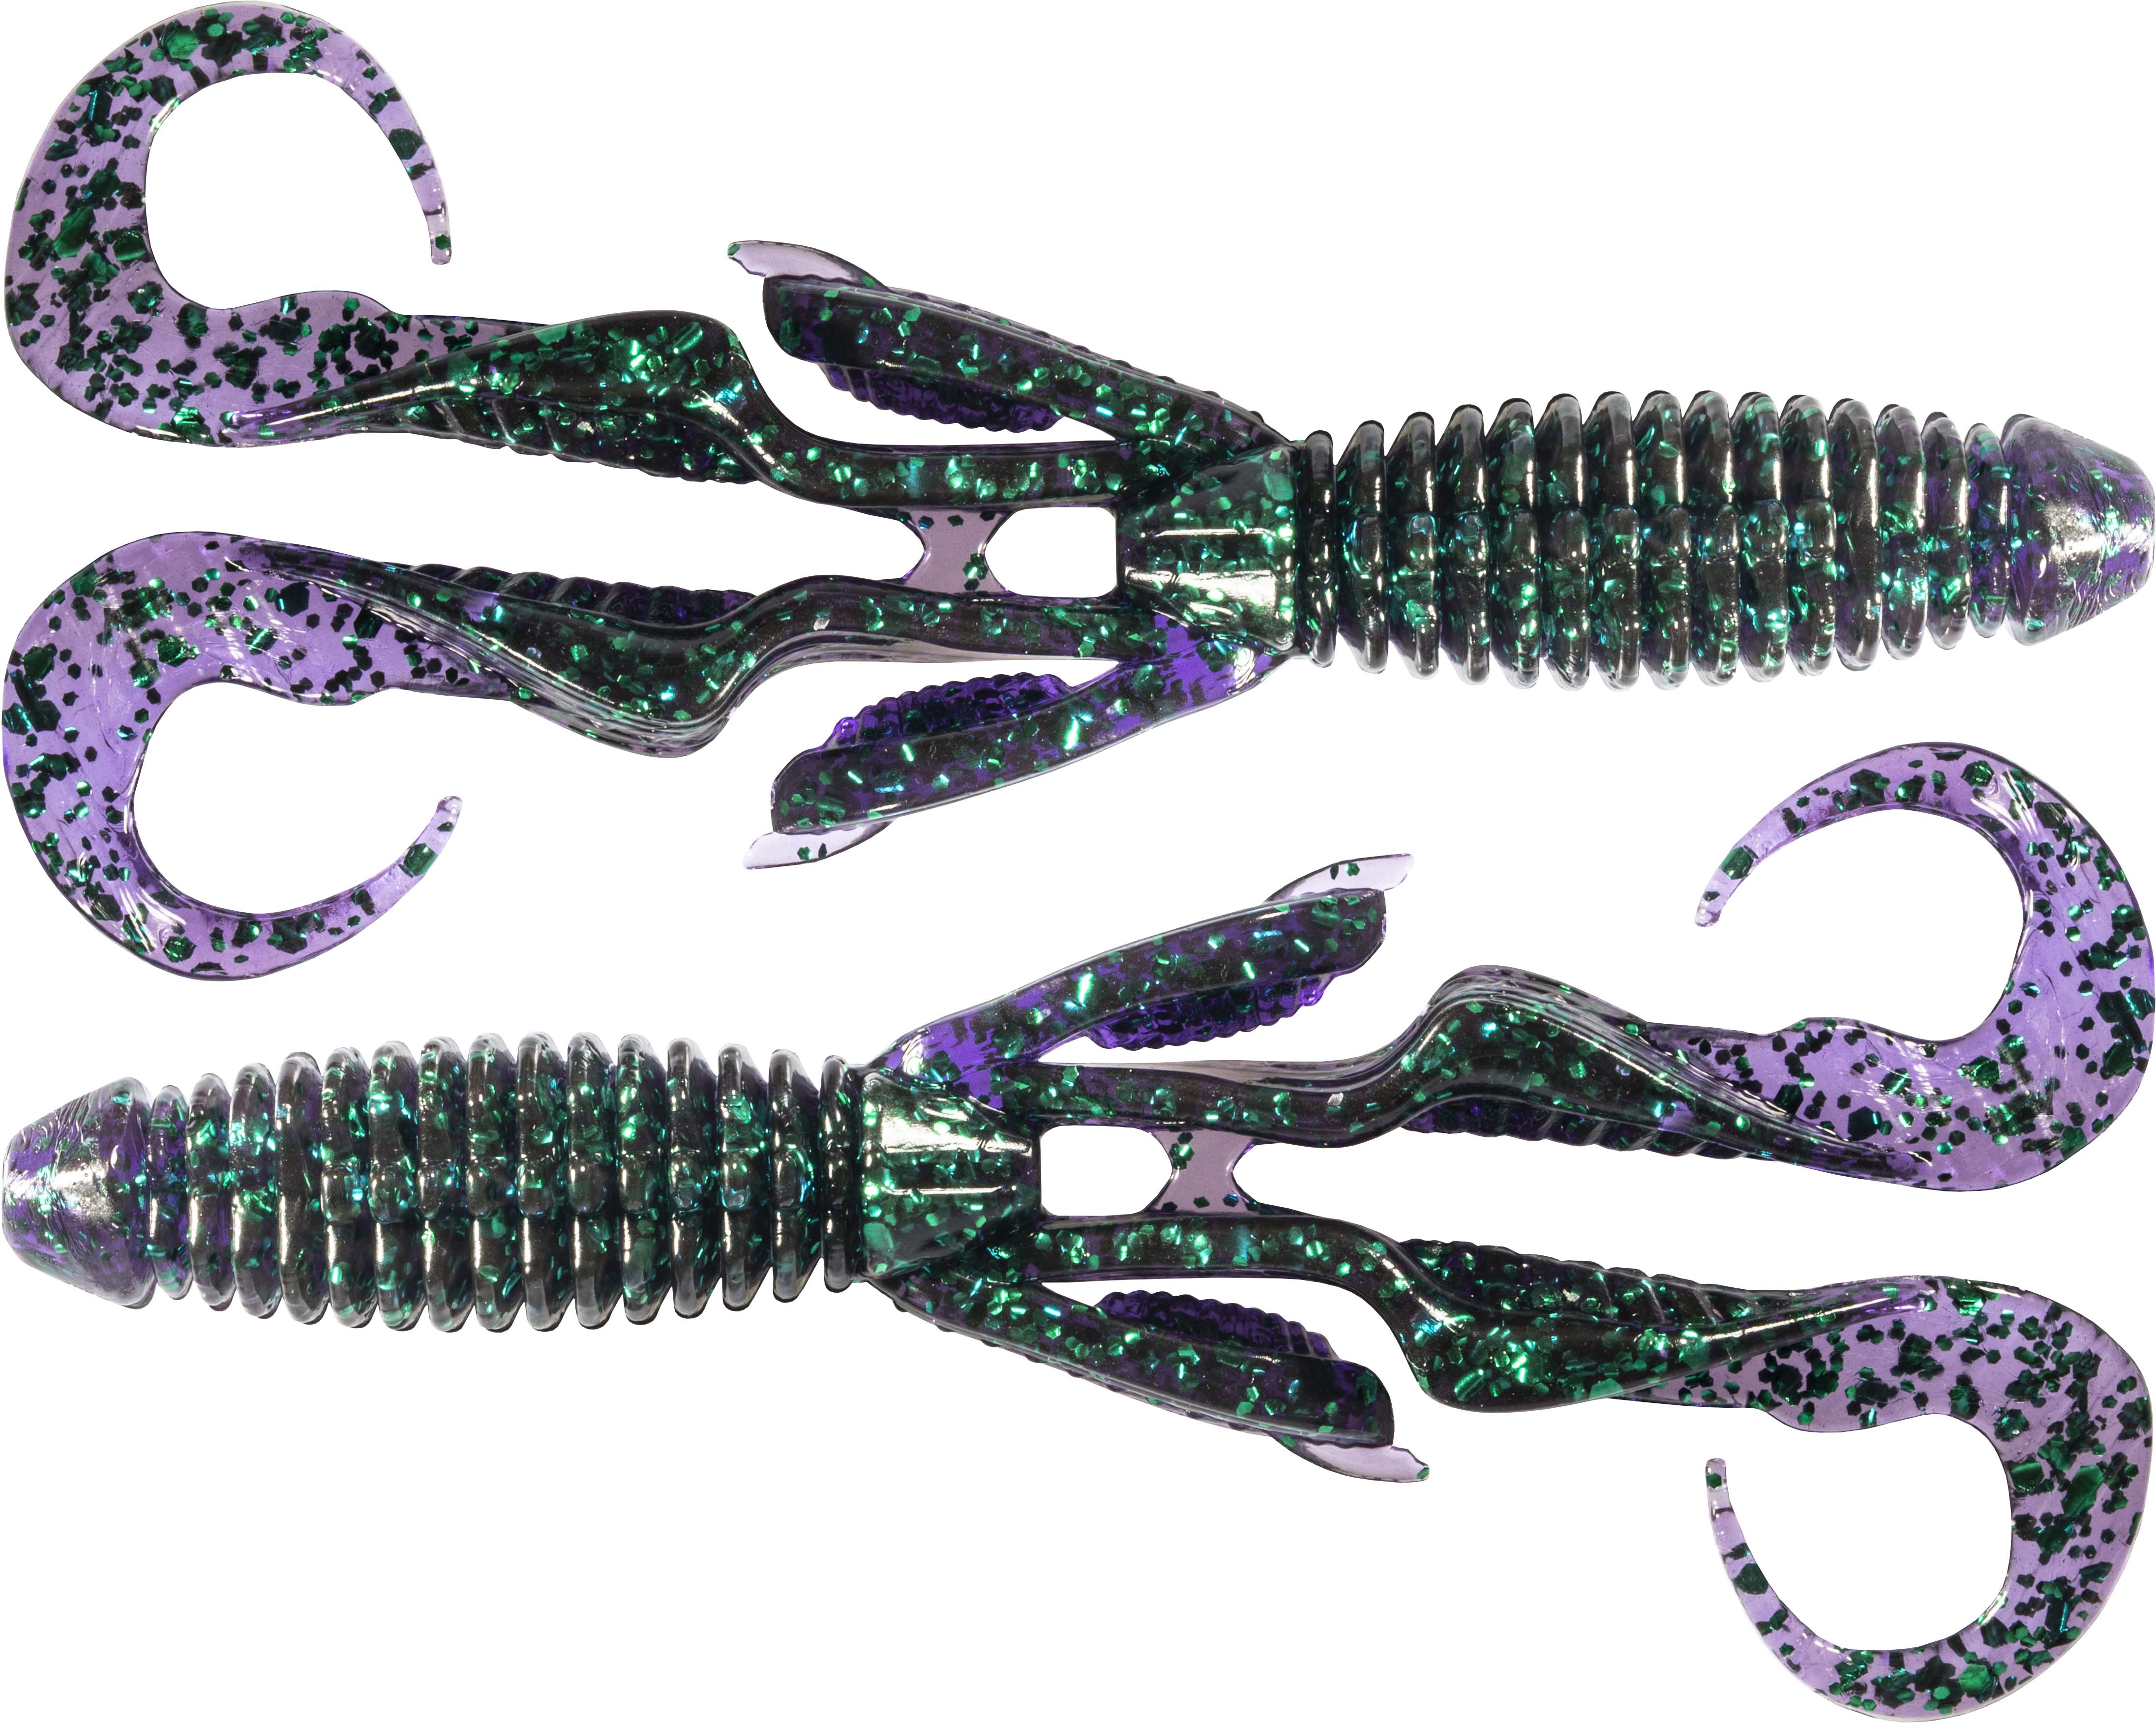 Simply Irresistible, Fishing Soft Plastic Leeches